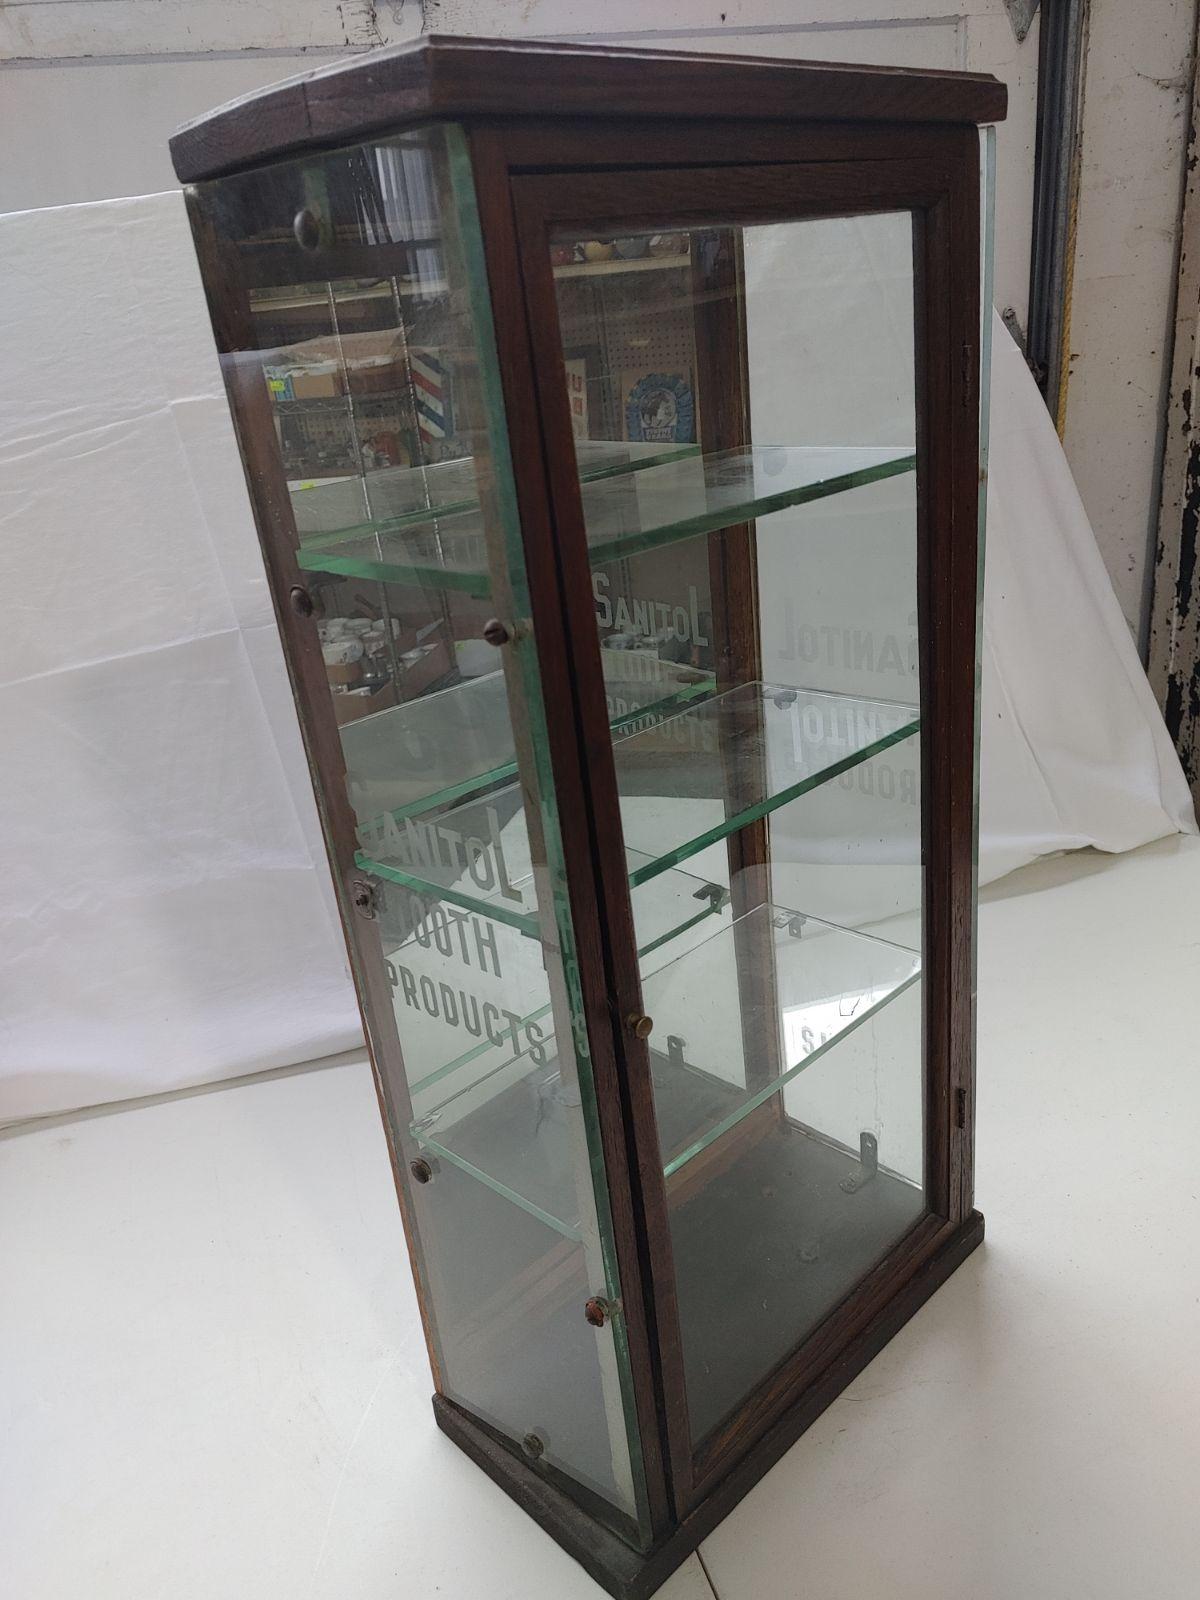 "Sanitol Tooth Products" Oak/Glass 3-Tier Display Case